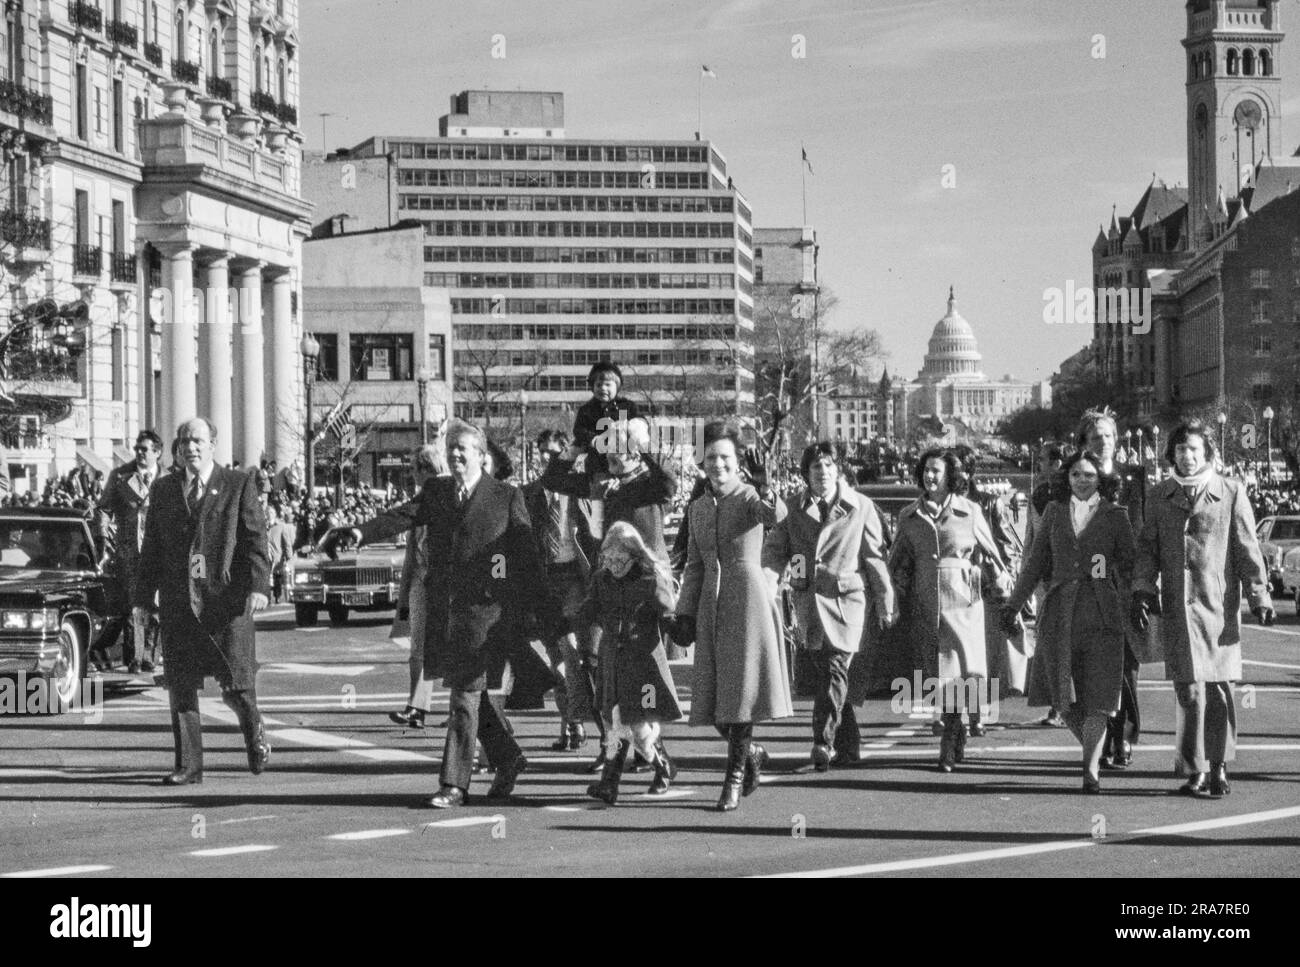 Jimmy Carter and his family - after being  sworn in as 39th President of the United States - walks down Pennsylvania Avenue on the way to the White House. By Carter's side is his wife, Rosalynn and daughter Amy. Photograph by Bernard Gotfryd Stock Photo